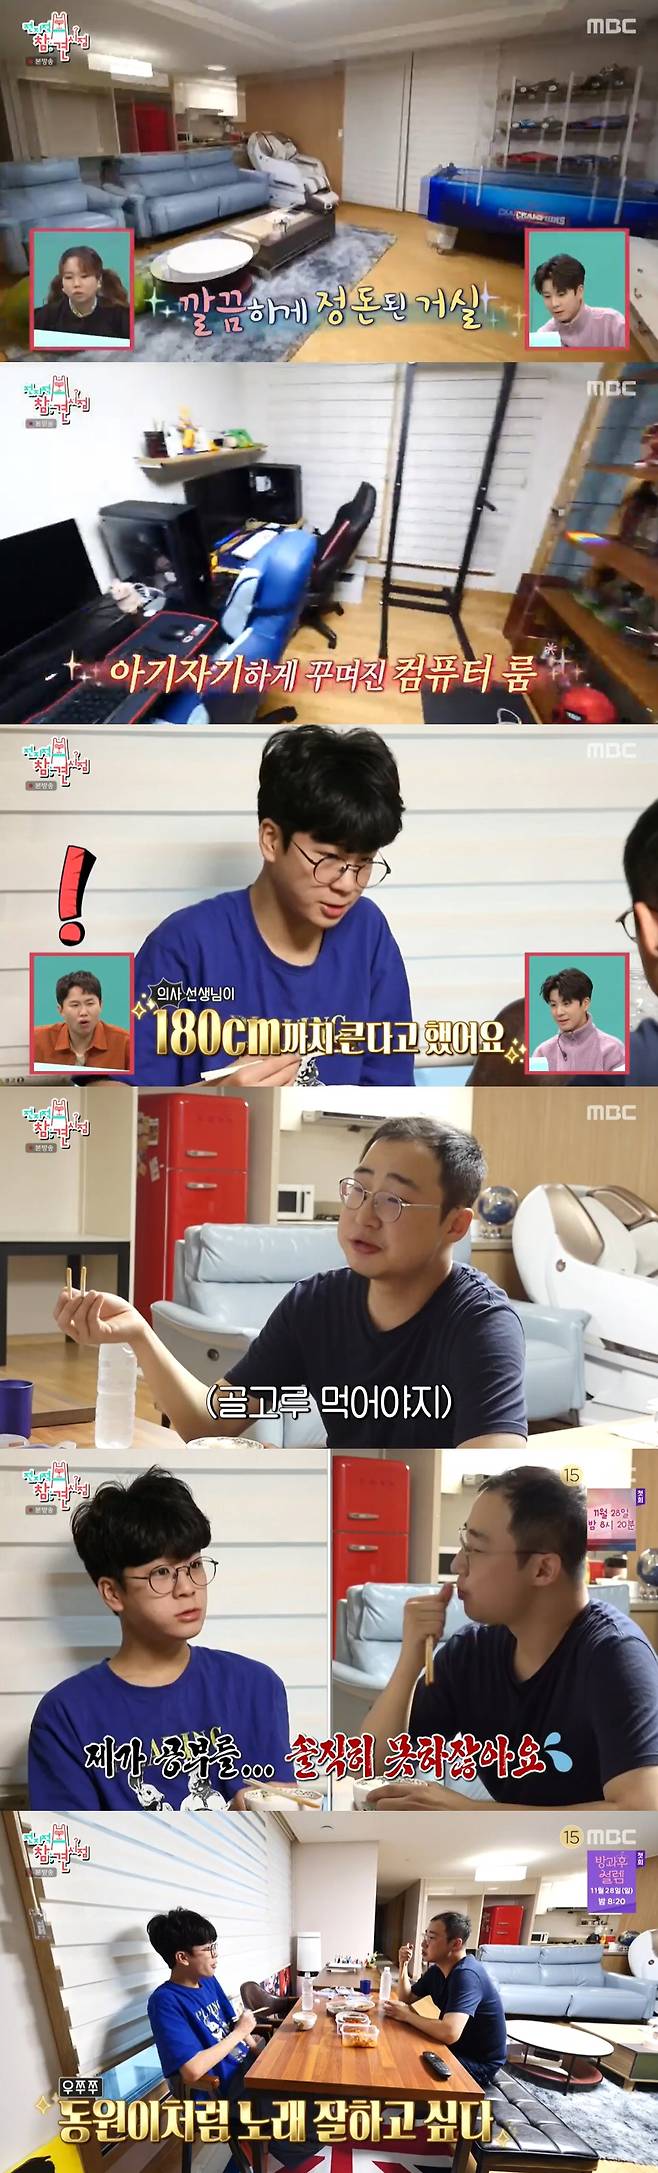 Point of Omniscient Interfere singer Jung Dong-won has released a Seoul house where Manager lives together.Jung Dong-won appeared on MBC entertainment program Point of Omniscient Interfere broadcasted on the 20th.Jung Dong-won, who appeared in the studio, said, When I was Mr. Trot, it was 148cm, but it was up to 167cm.Also, about the standard of sharing my brother and uncle, he said, I go as I feel when I do not think about my age.The daily life of Jung Dong-won, which was released afterwards, showed him living a soul life with Manager.The Manager of Jung Dong-won said, (Jung Dong-won) Gyeongnam is the main house, but I came to Seoul because of the schedule.I have been living together for a year because I need a guardian. I think I am the busiest 15 years in my country. Their house attracted attention as a spacious space from the long corridor to the living room.Manager woke Jung Dong-won as he prepared breakfast; while eating together, he nagged, saying, Eat evenly.Jung Dong-won said, He said 80 percent is hereditary. He said its up to 180 centimeters tall. He also said, Why do you do this to your beard?and asked Manager and his real brother Chemi to laugh.Jung Dong-won said: I honestly dont study well, Im not trying to, I just kept doing the same thing for a month and I couldnt remember.I envy the kids who are good at studying. Manager said, You are persistent about what you are interested in.The children will envy you to sing well, he said, and told them to take an online class.After taking classes and playing games with Manager, Jung Dong-won pulled out his saxophone and caught his eye.Jung Dong-won was very attracted attention by showing high-quality saxophone skills. Jung Dong-won said, I lived in the country and did not have a school.I will play the song that my grandfather practiced to learn, he said.Yang Se-hyeong asked Jung Dong-won, Do you know that you are a puberty now? Do you know what two bottles mean?I think its a little puberty, I used to wear underwear for Sigi now but I cant, I think Im falling out of style, Jung Dong-won said.Another cast member Jonathan, a peer of Jung Dong-won, said:  (Jung Dong-won) seems to be a puberty.Sigi, who comes up with no in all words, is a puberty. When I ask how are you? I say no. Jung Dong-won arrived at a festival rehearsal venue after getting into a car with Manager and visiting a hair shop.Jung Dong-won showed seriousness to check the condition of MR and Inyer carefully during rehearsal.Jung Dong-won said at the end of the broadcast, I remodeled the house I had bought before, made the first and second floors into a cafe, and made the third floor into a house where my family lives.There was also a Jung Dong-won road, which is 7.3 kilometers long, on the way home. The performers expected Jung Dong-won to play, saying, What will you look like when you are 30?